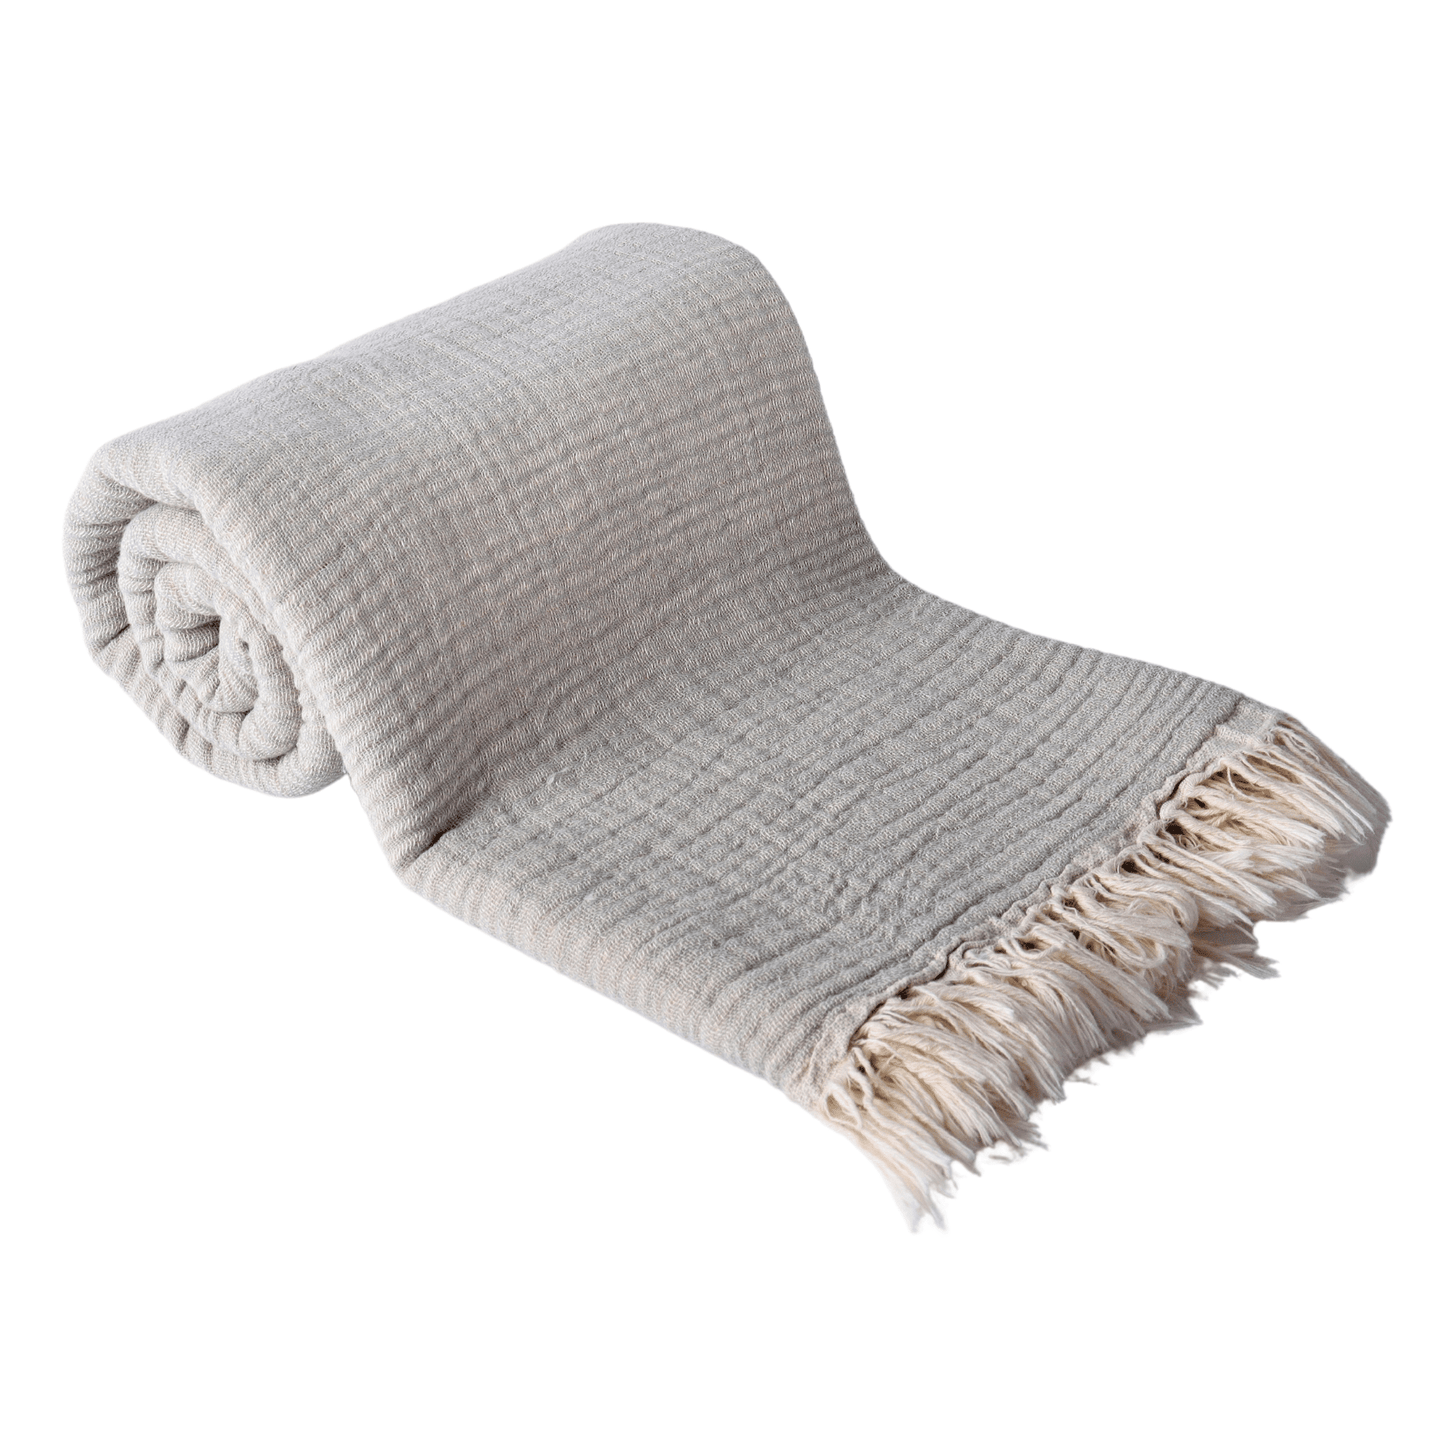 Muslin Towels for Adults light gray 3